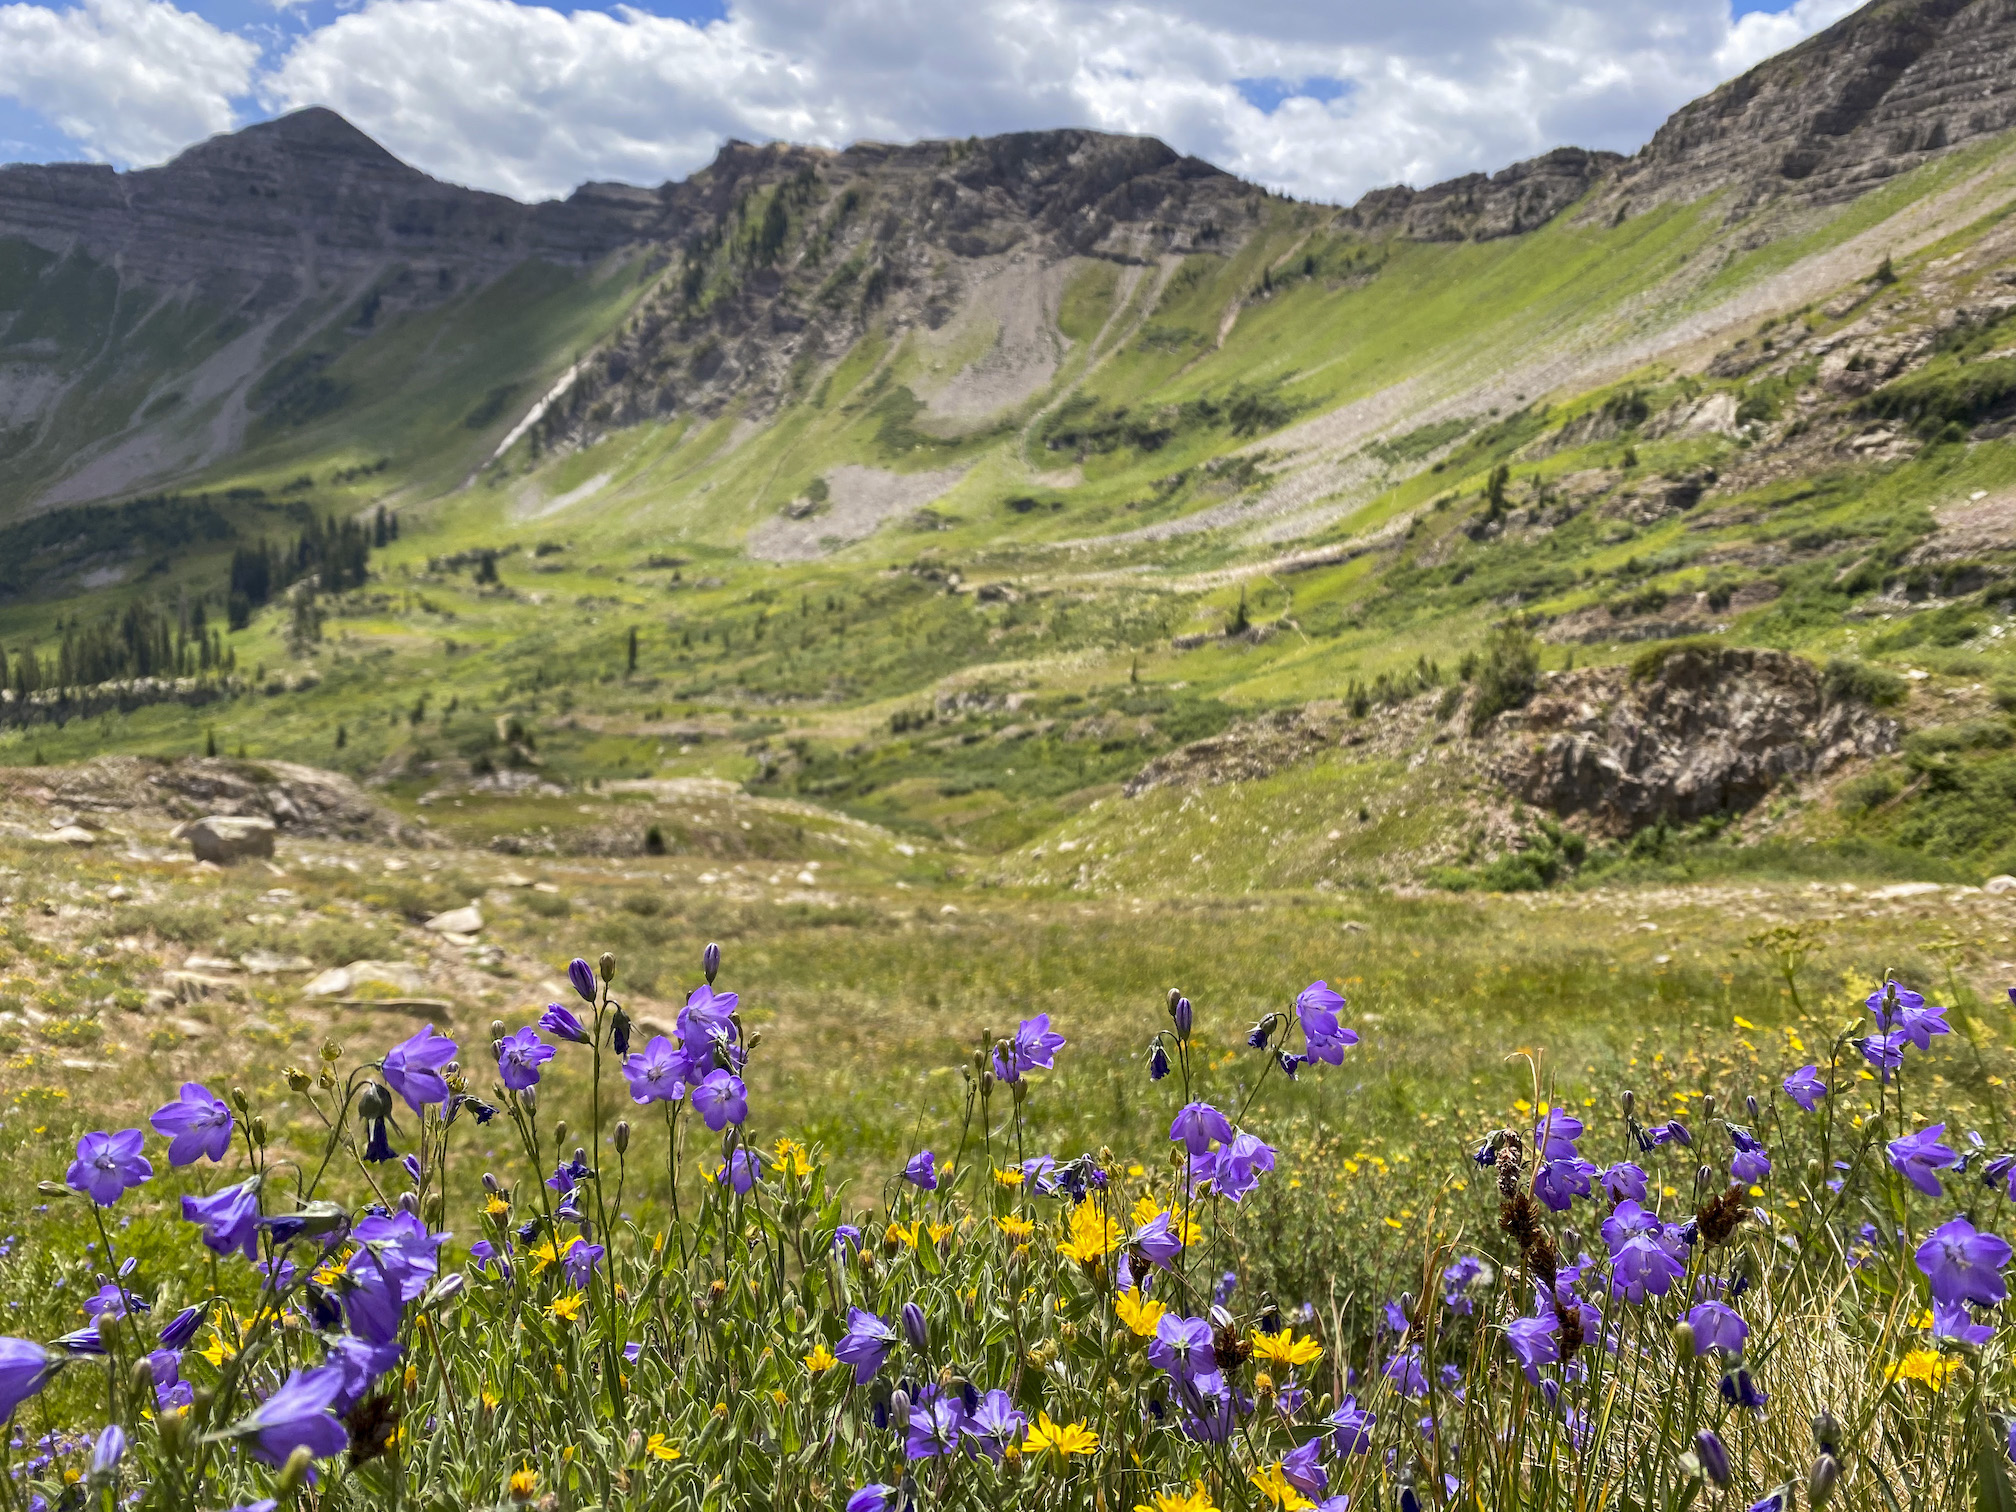 A mountain view with wildflowers in the foreground